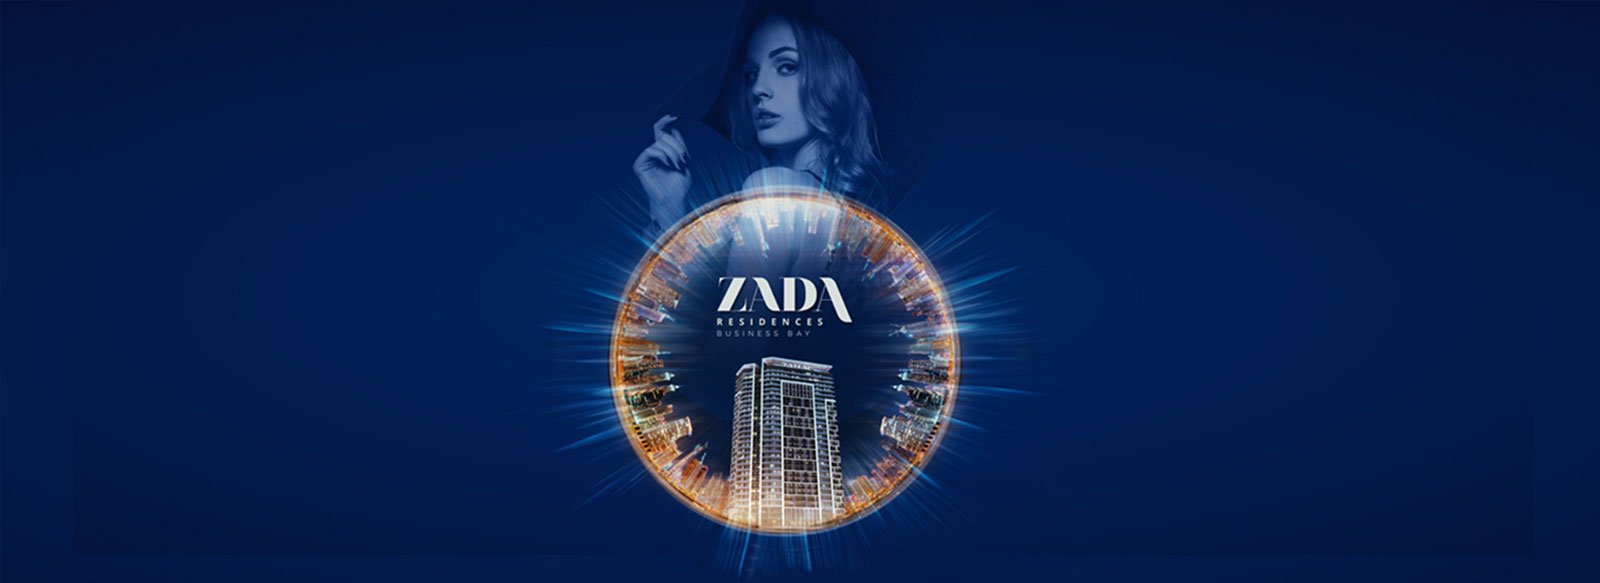 Zada Tower Exclusive Offer